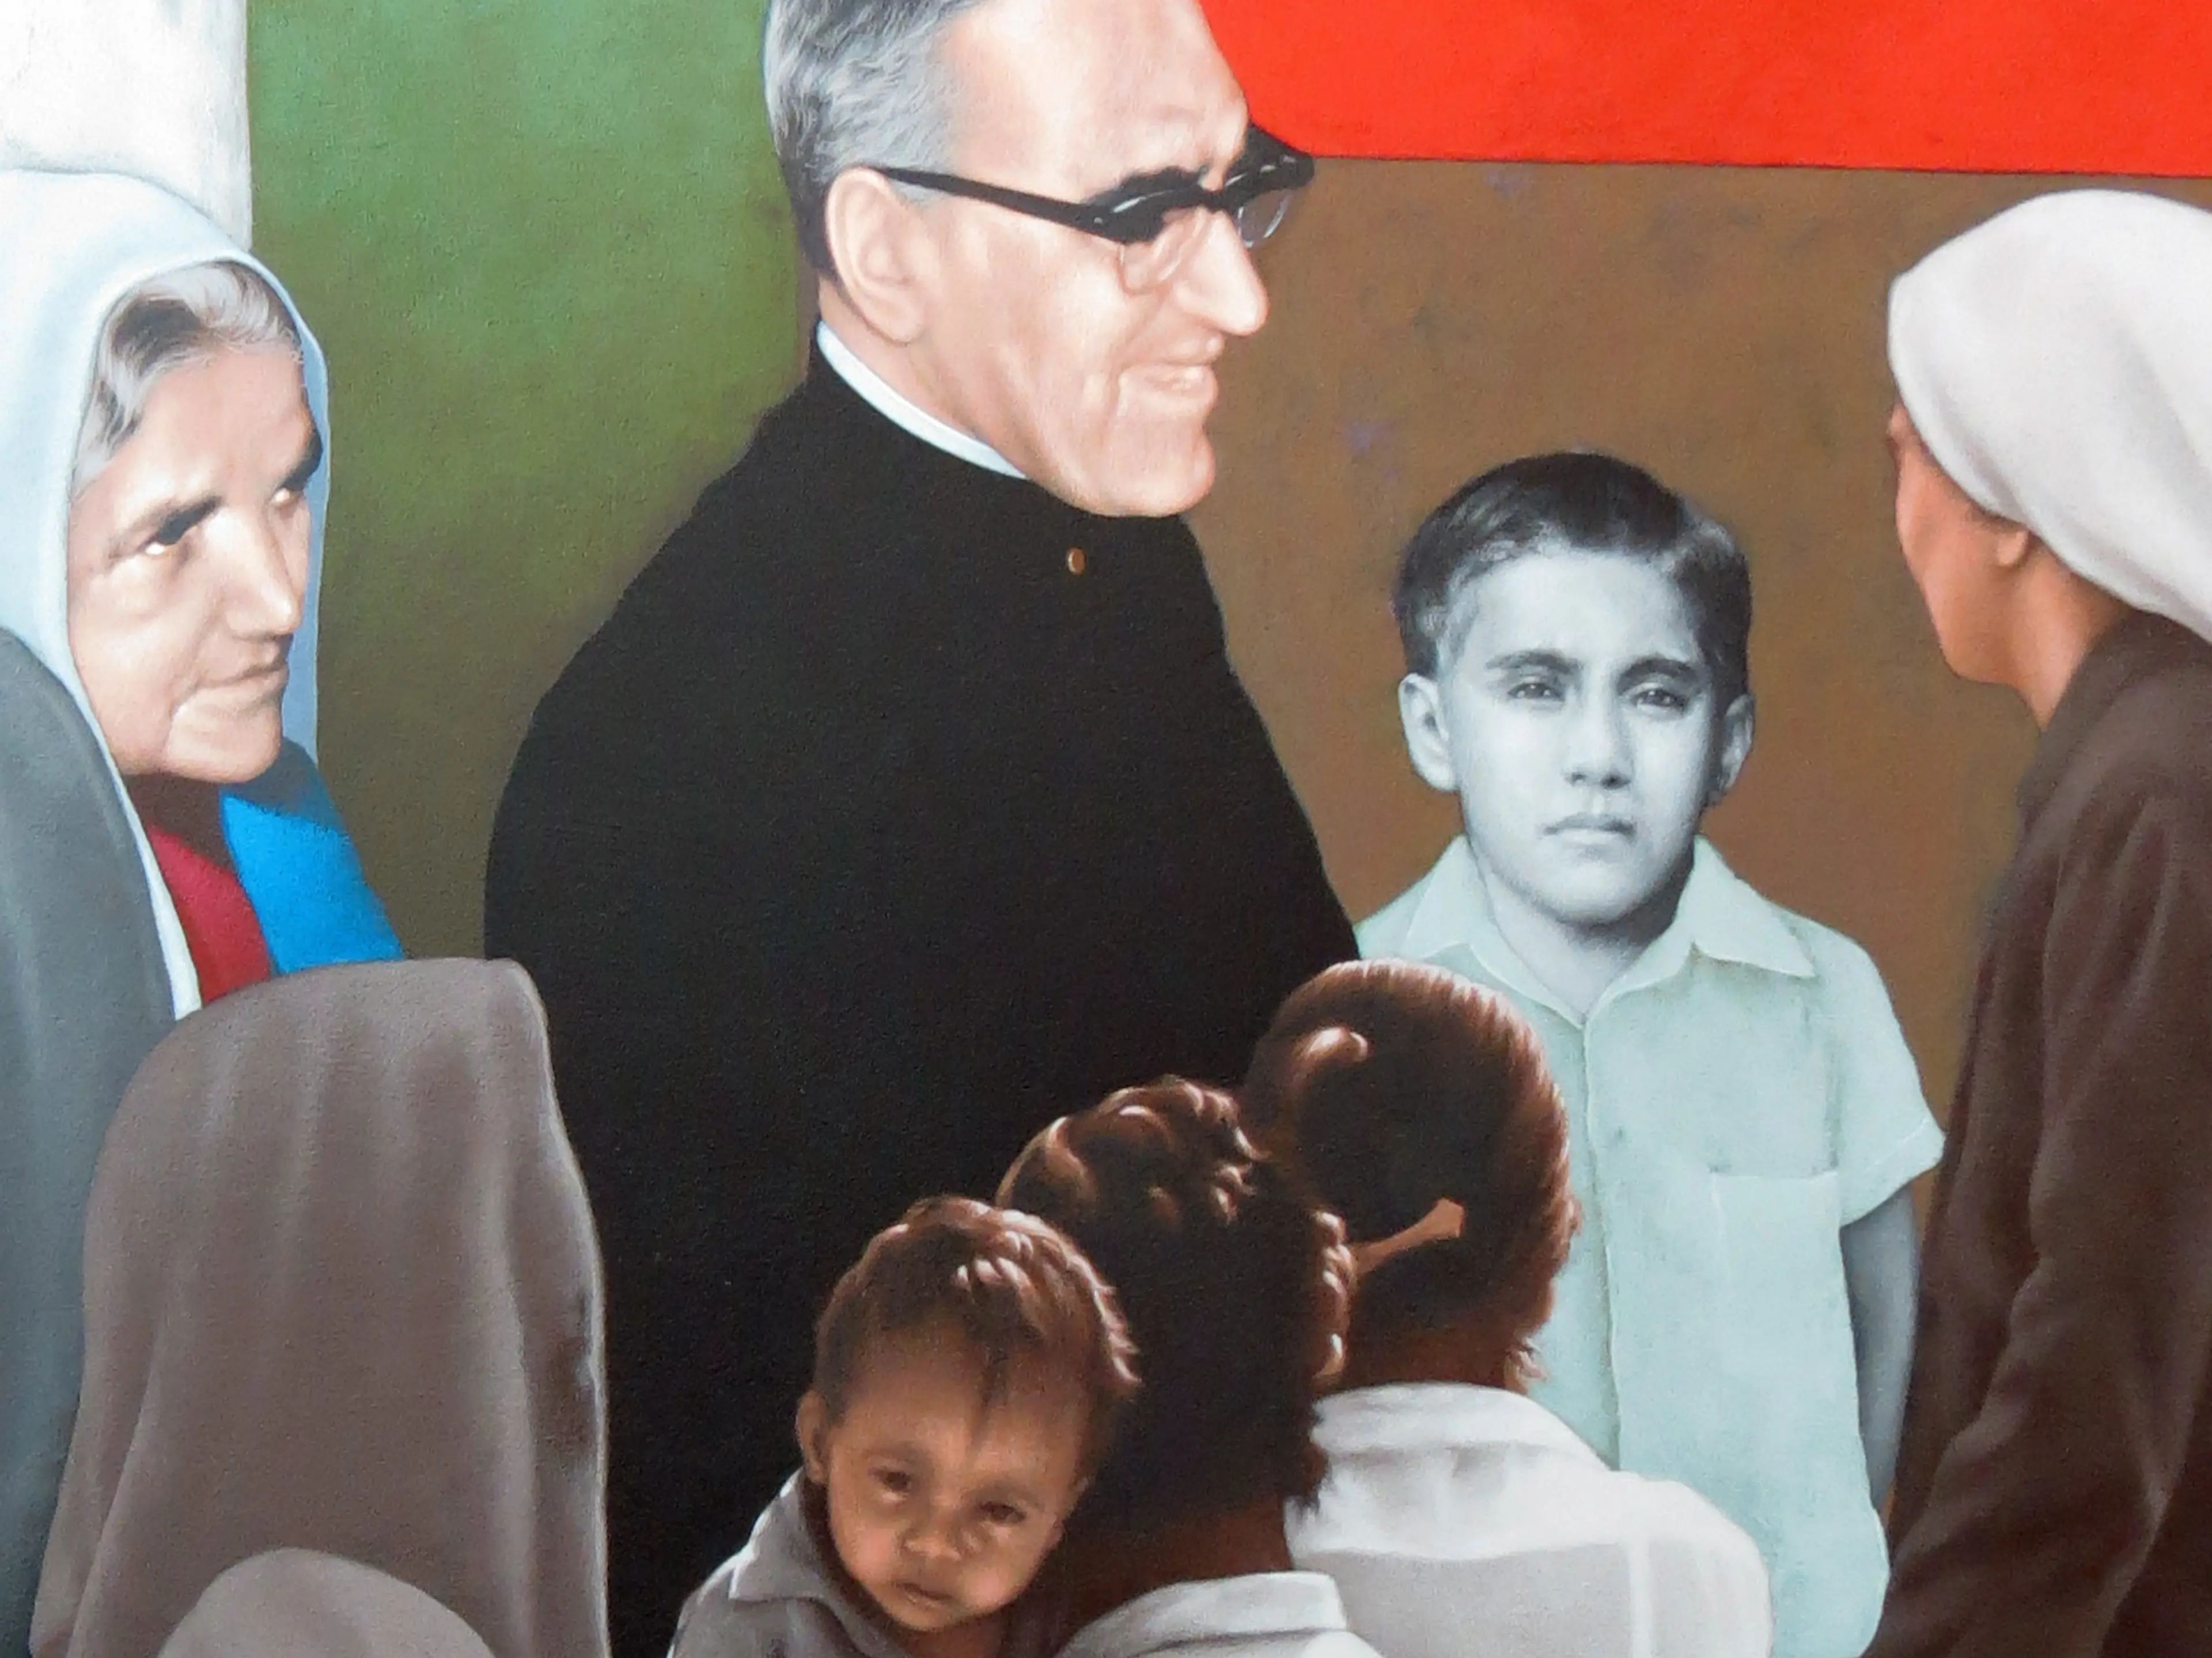 Romero and his people mural